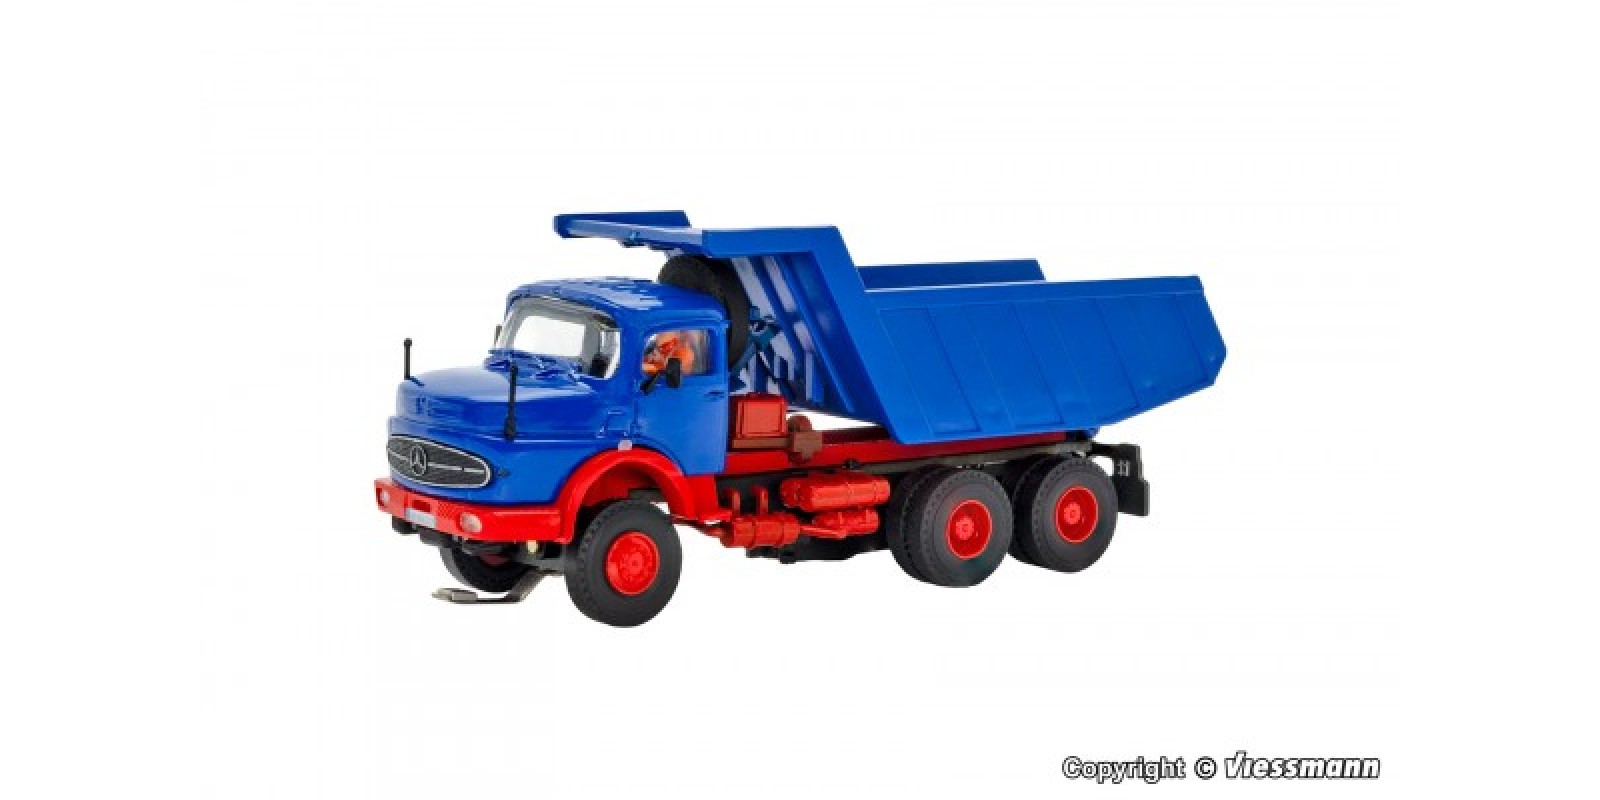 VI8019 H0 MB round bonnet 3-axle with MEILLER tipper, basic, functional model